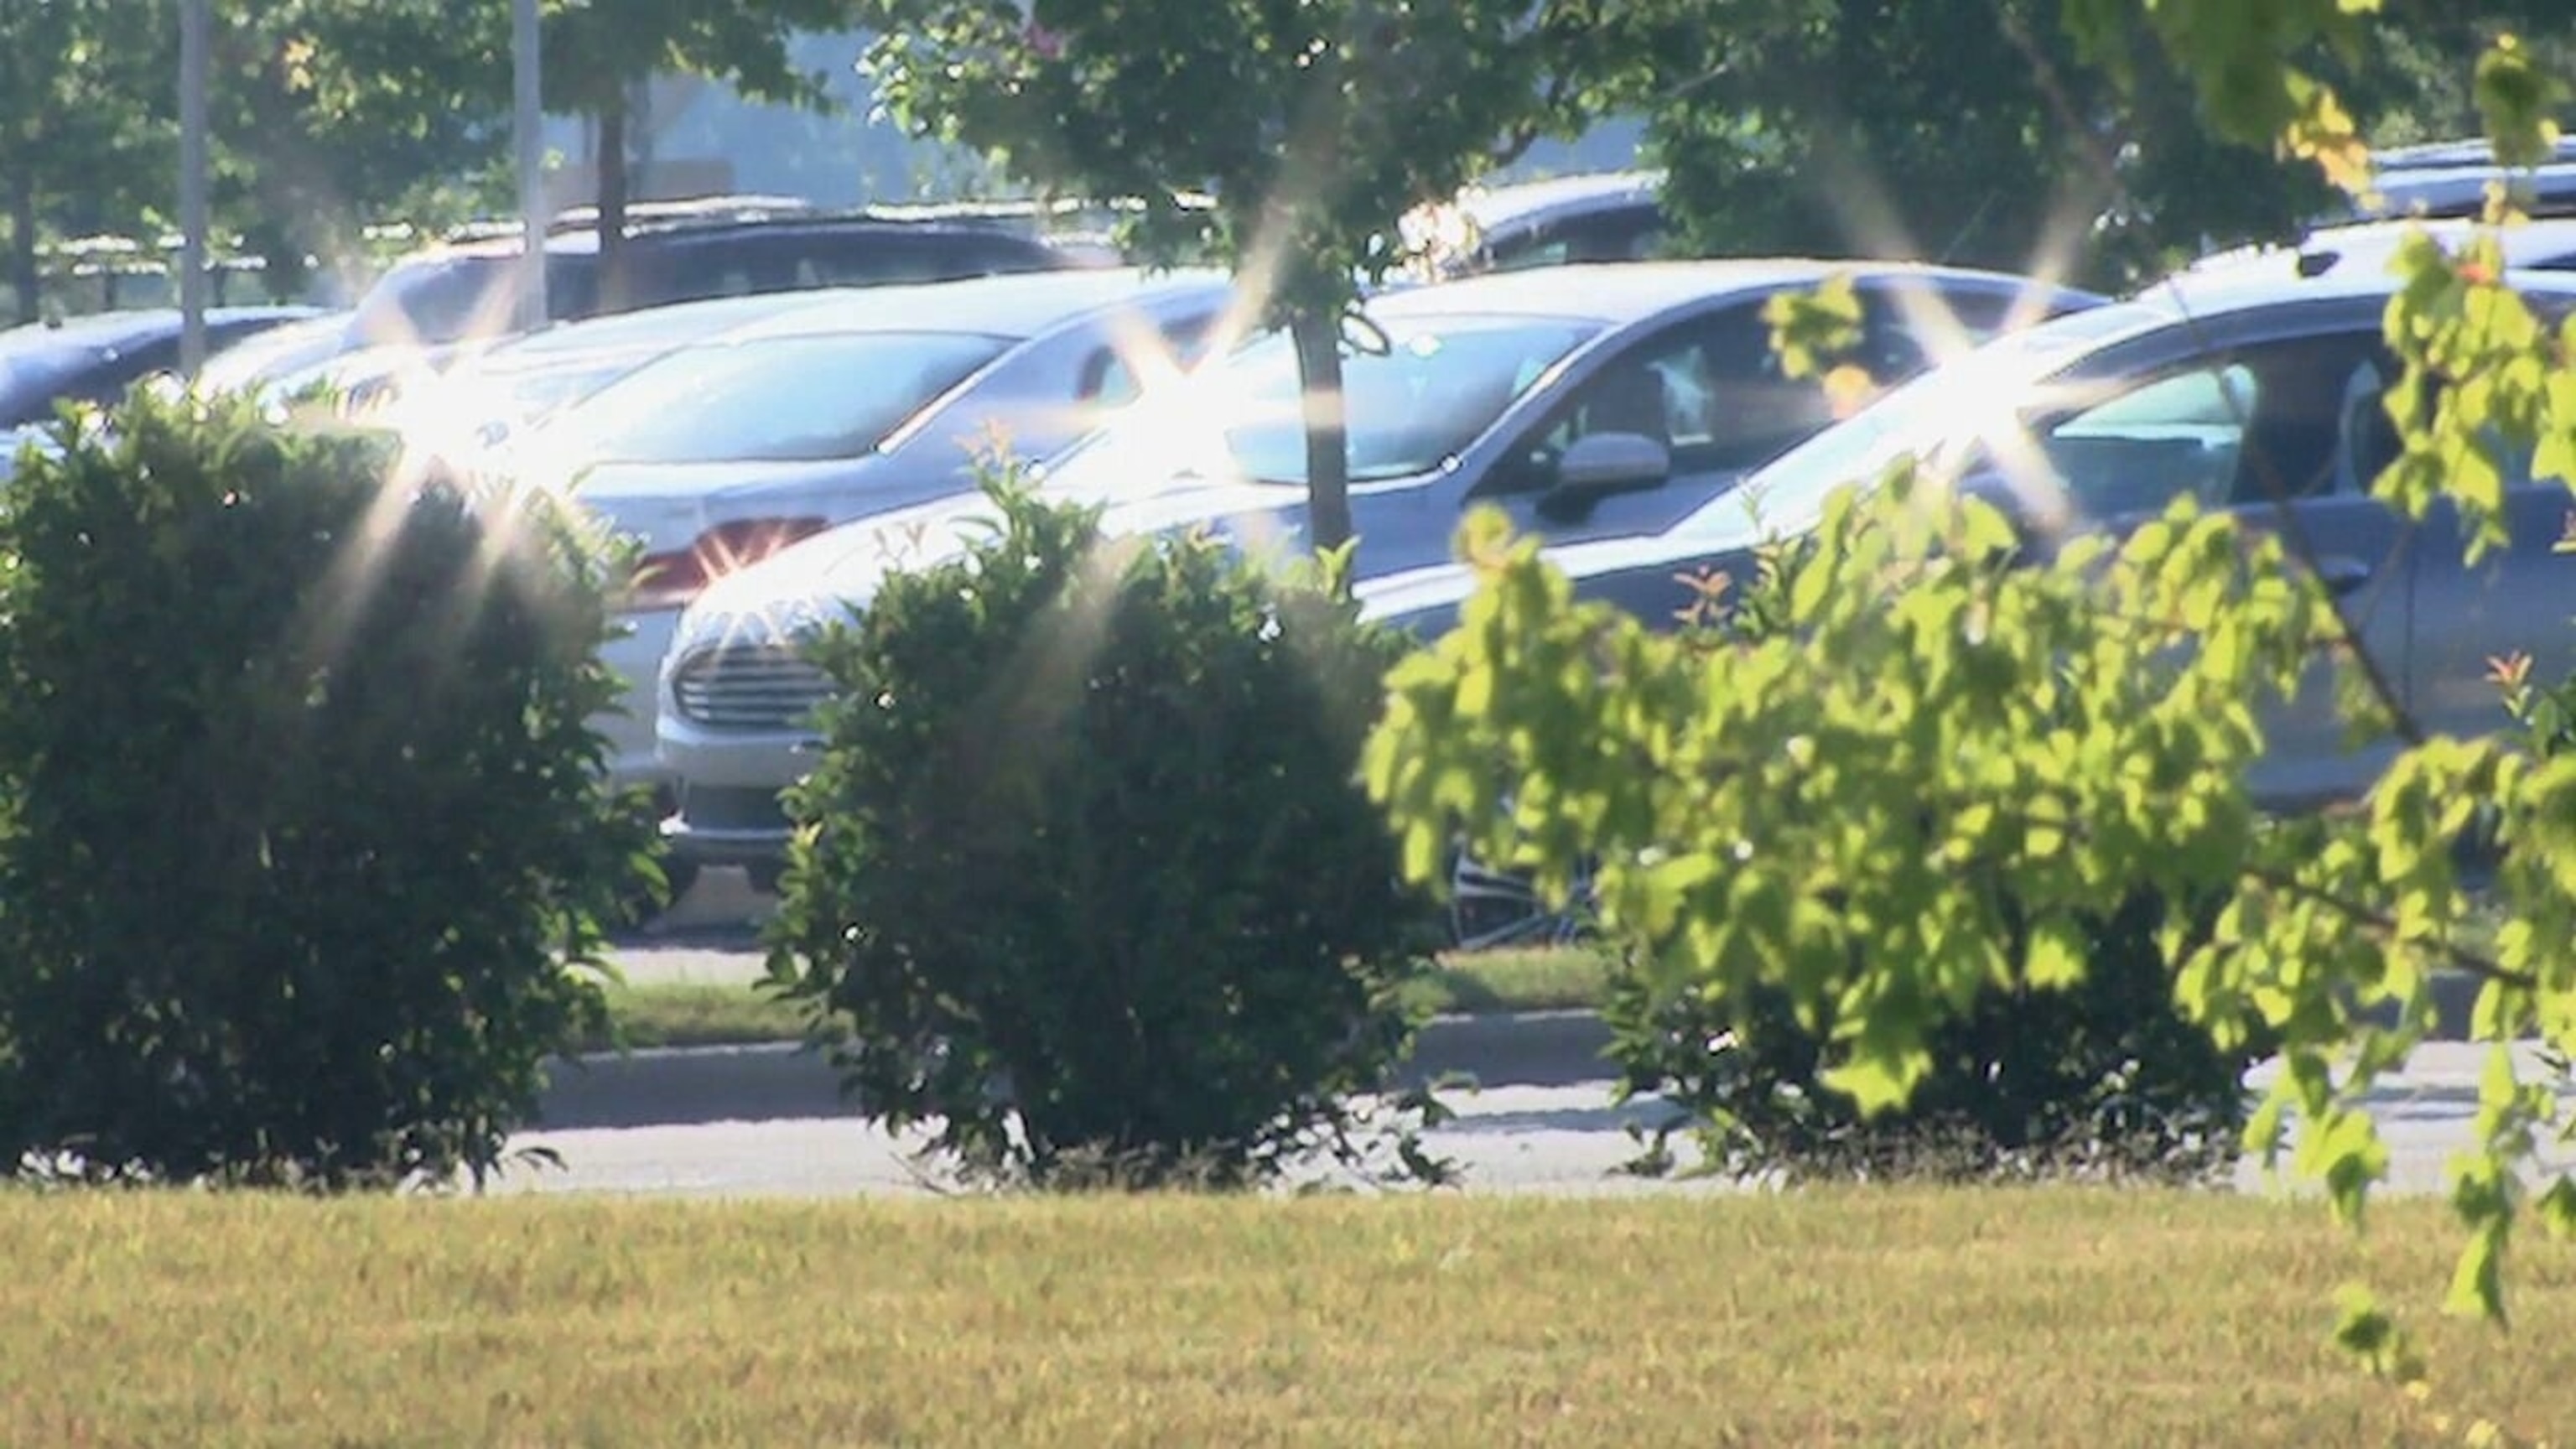 PHOTO: In this screen grab from a video, cars are shown parked in the sun.